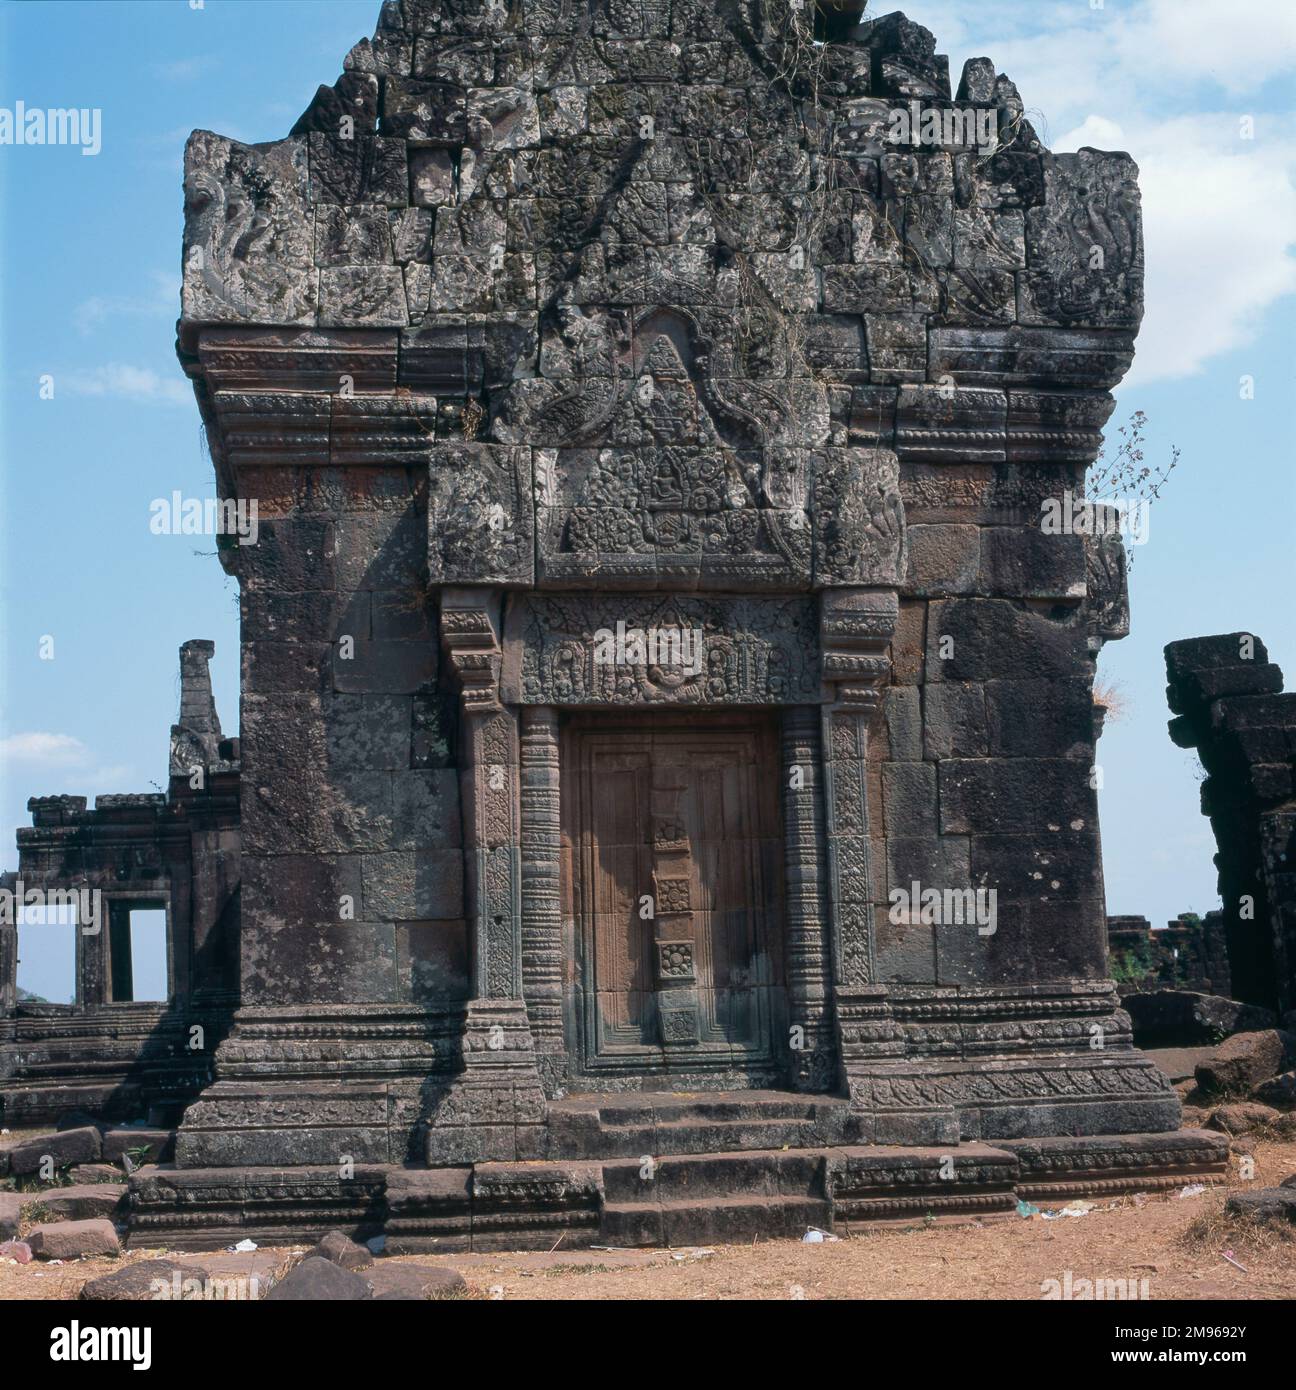 Ruin of the Wat Phou or Vat Phou, a Khmer temple complex in Champasak Province, southern Laos.  The surviving structures date from the 11th to 13th centuries. Stock Photo